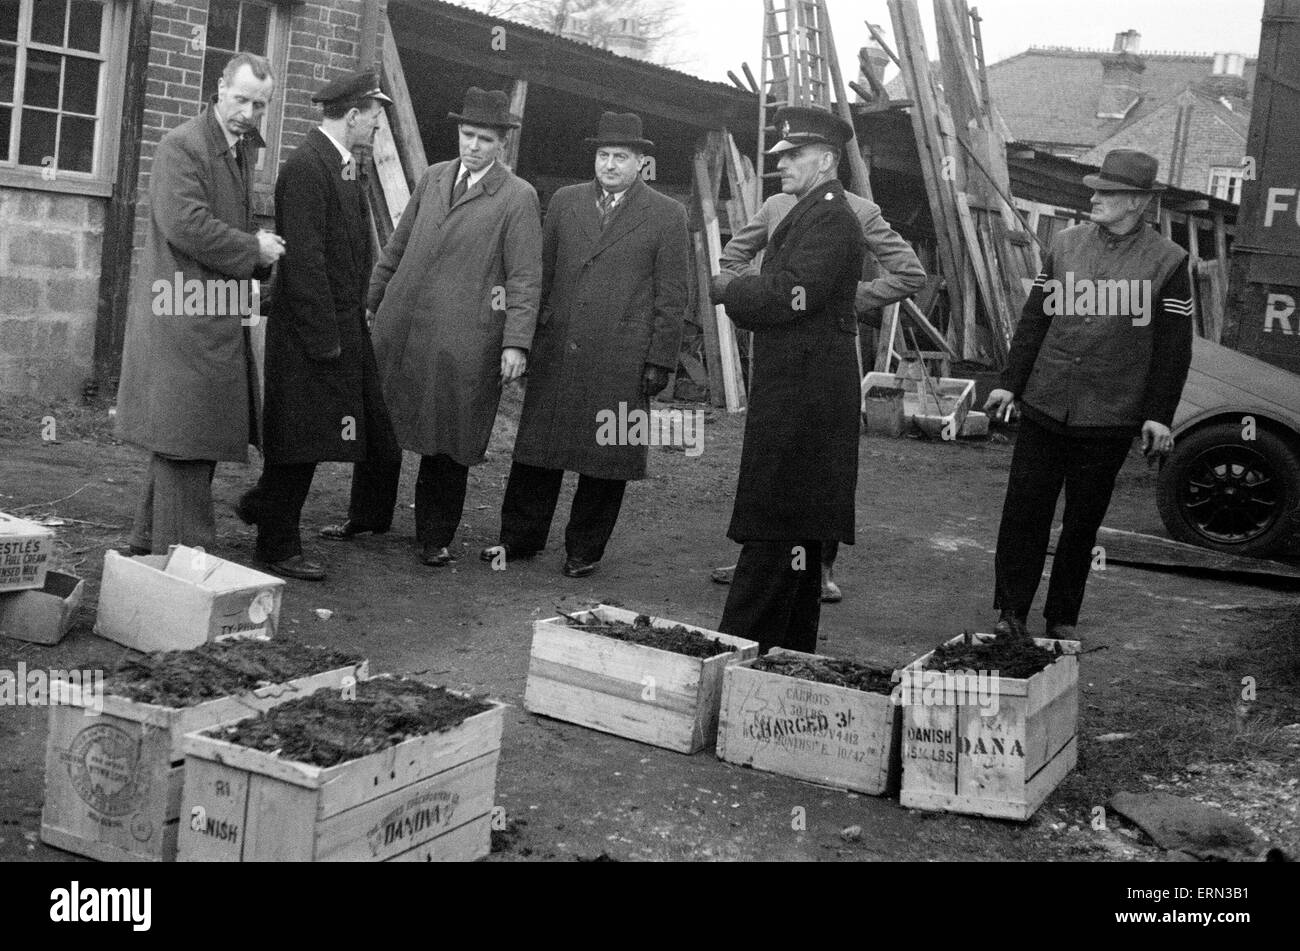 John Haigh Murder case, police search Hurstlea Products Factory at Crawley, scene of the 'acid bath' murders. Detectives search for remains and clues in the grounds of the factory. A rich widow was missing, Mrs Durand-Deacon, 1st March 1949 Stock Photo